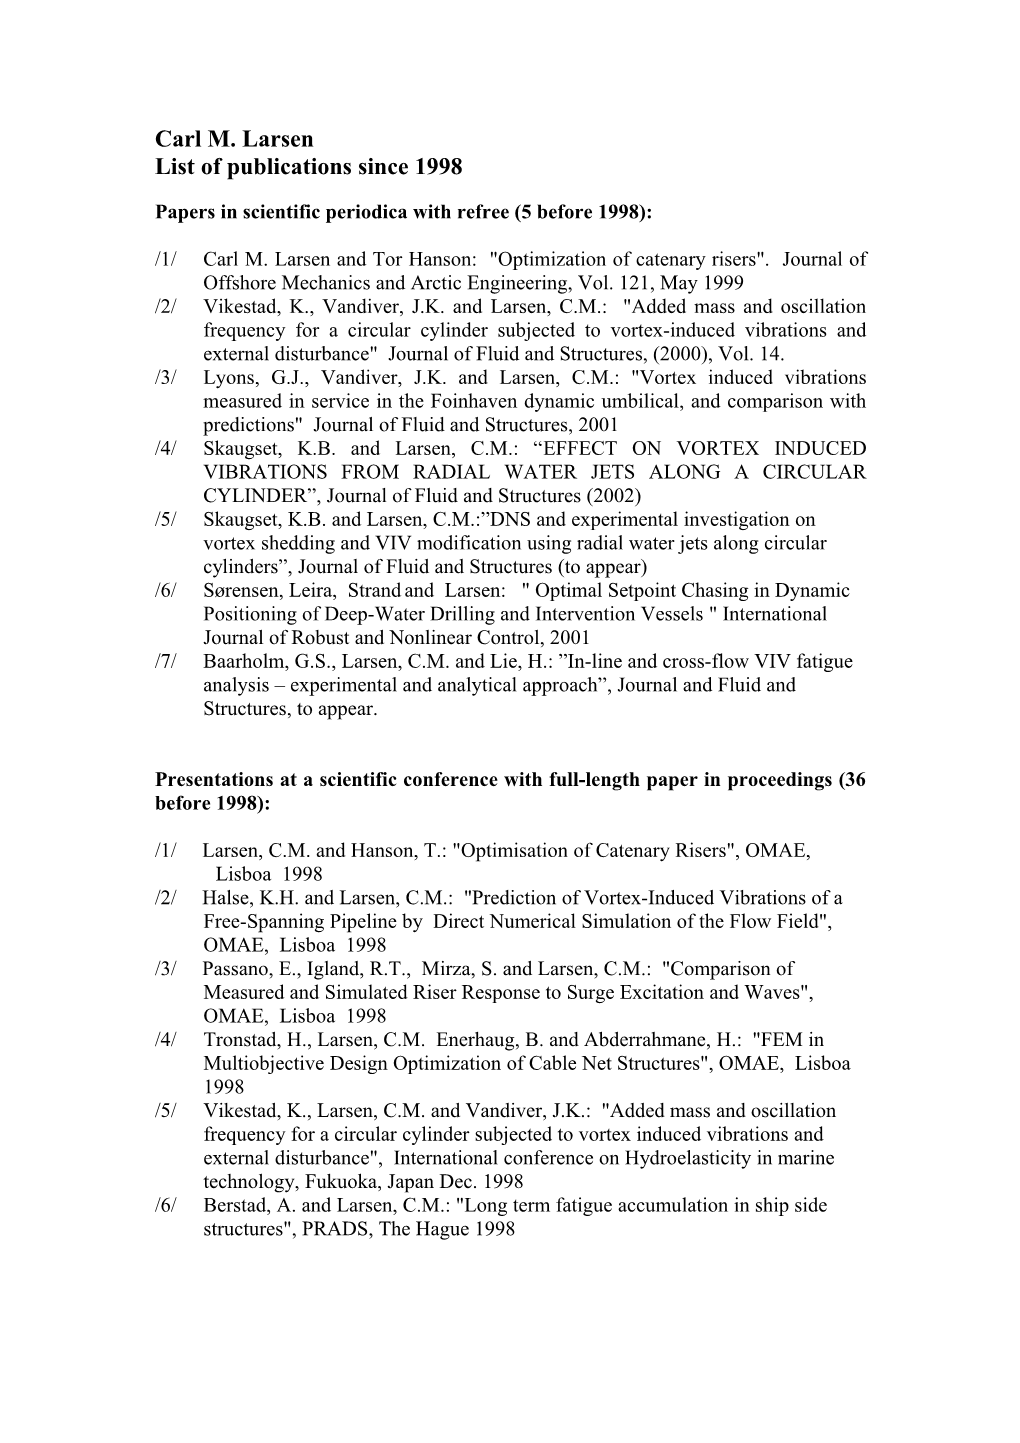 Papers in Scientific Periodica with Refree (5 Before 1998)